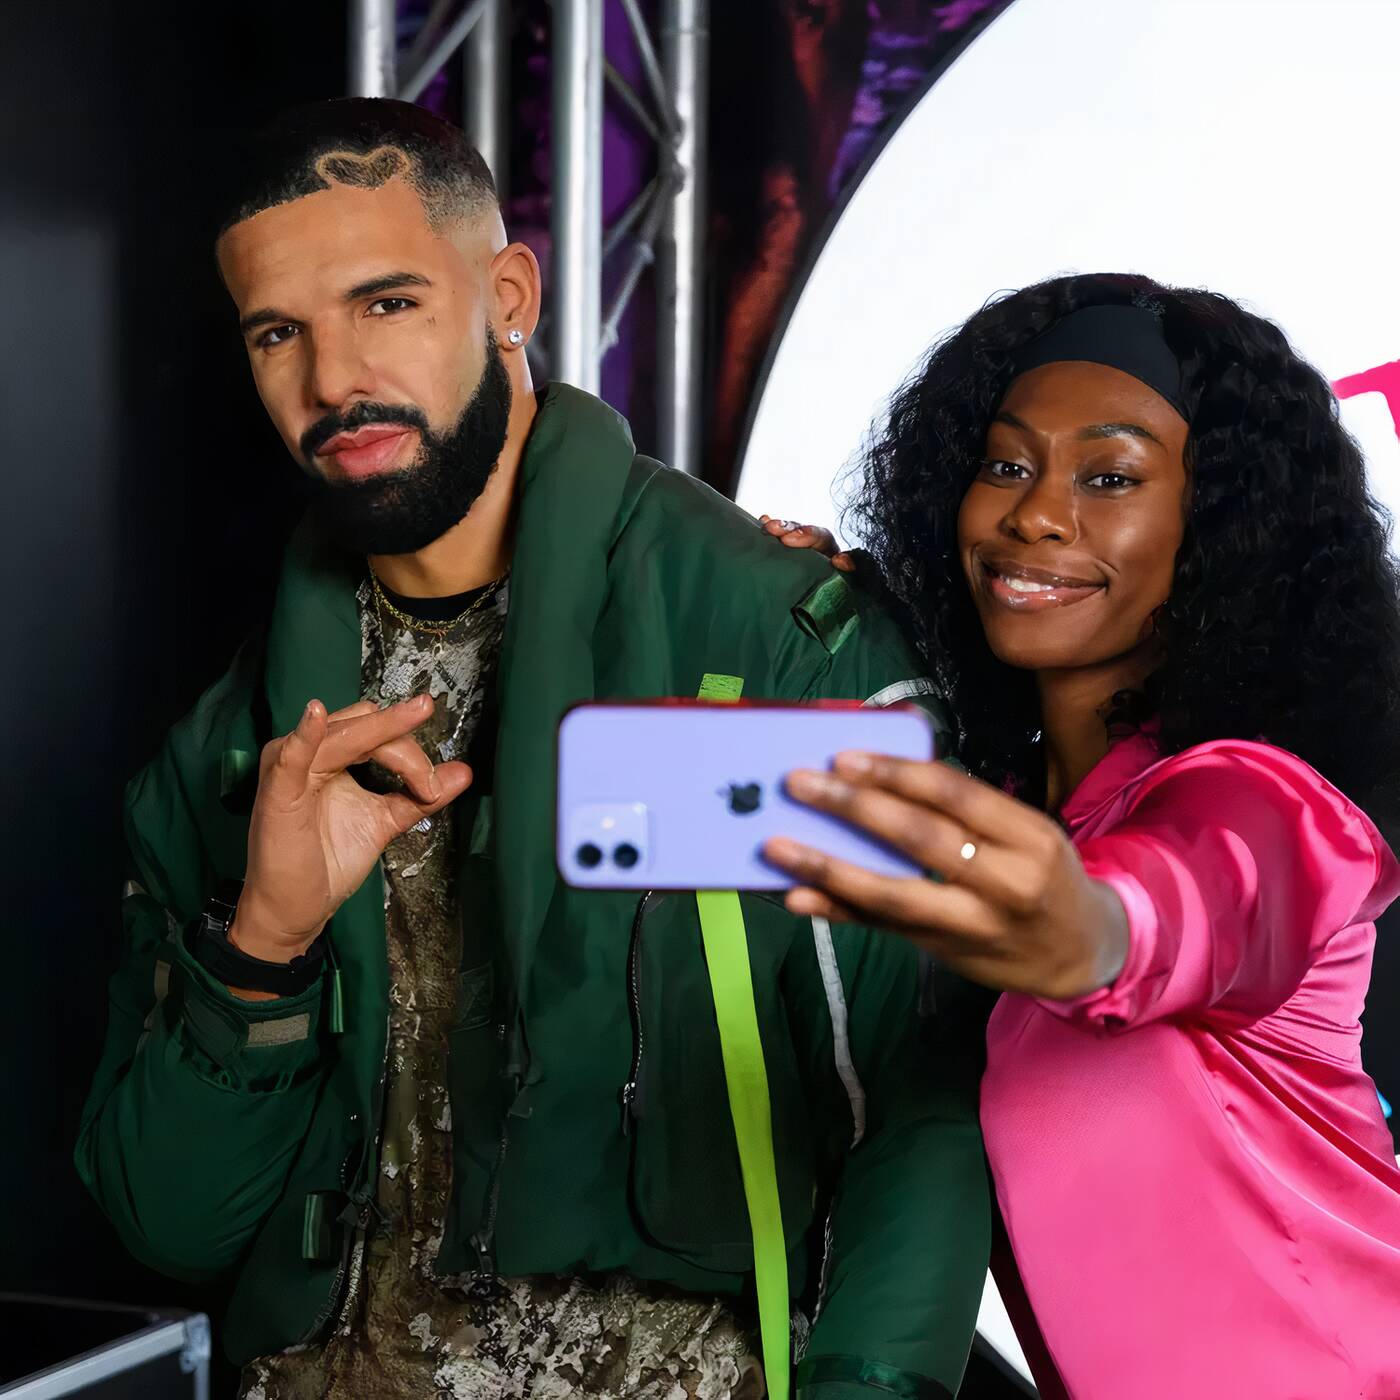 Drake serves big hot daddy energy as a wax figure at Madam Tussauds